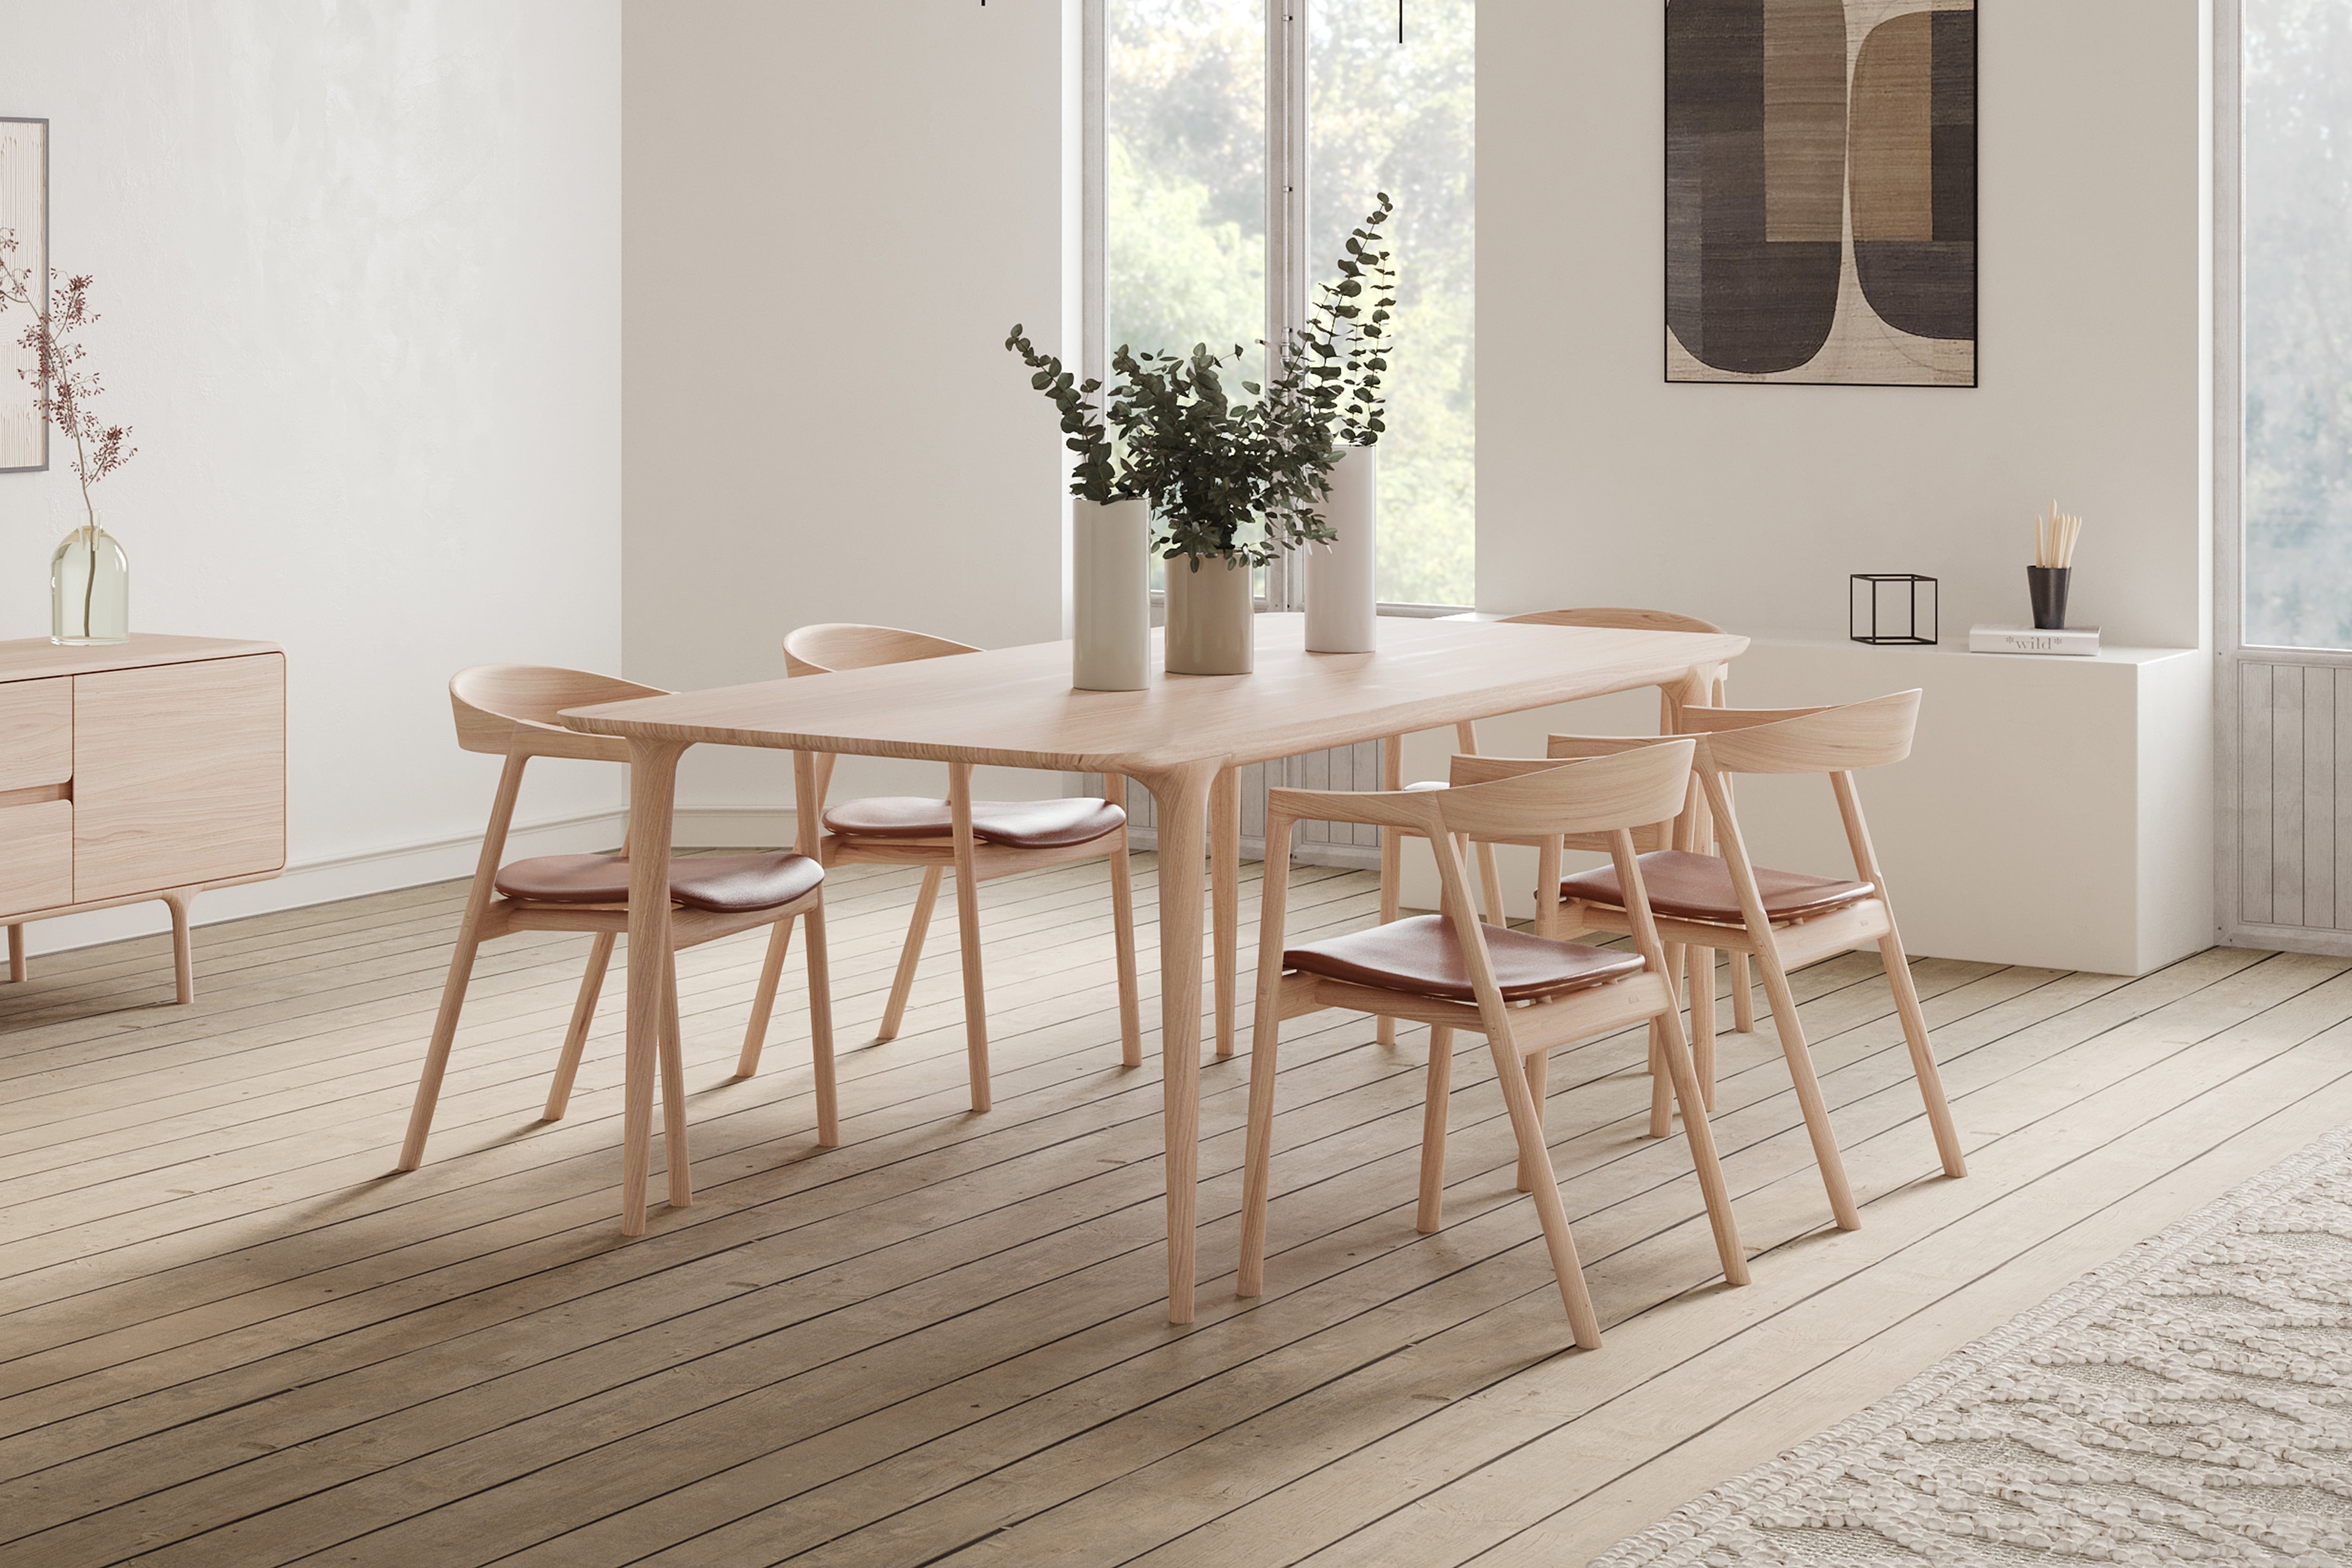 FAWN dining table